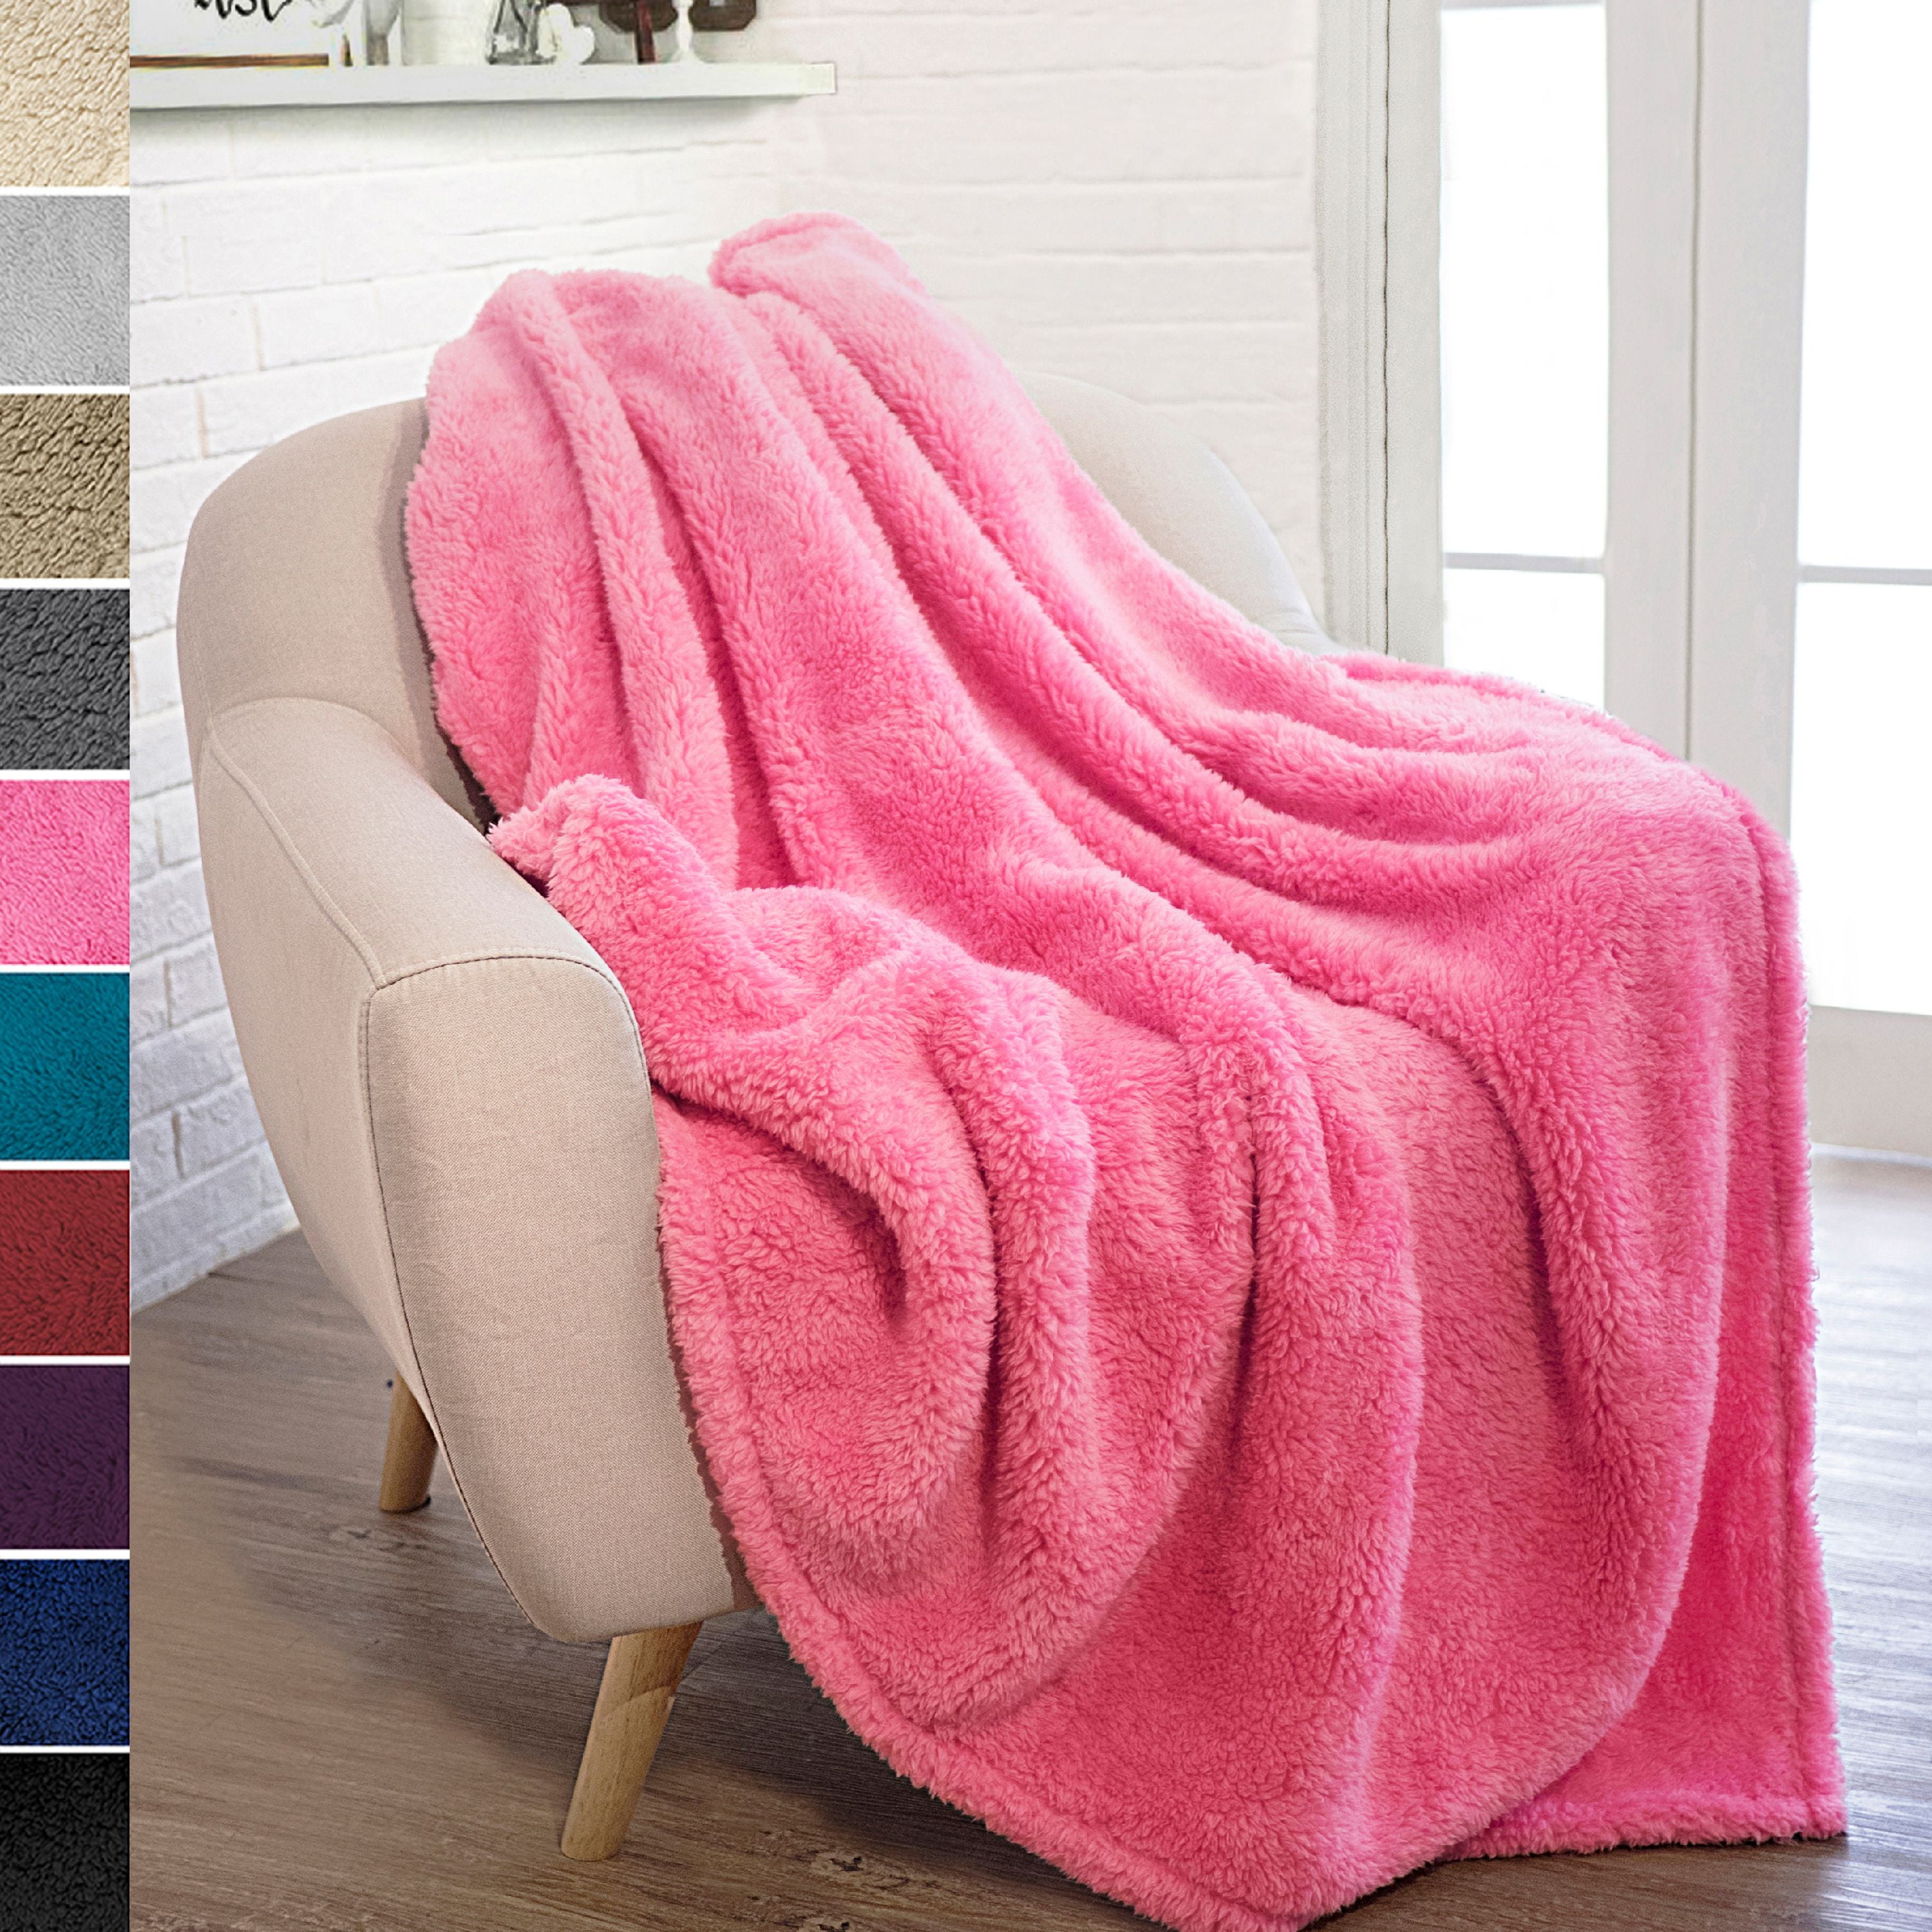 PAVILIA Plush Sherpa Throw Blanket for Couch Sofa | Fluffy Microfiber  Fleece Throw | Soft, Fuzzy, Cozy, Lightweight | Solid Pink Blanket | 50 x  60 